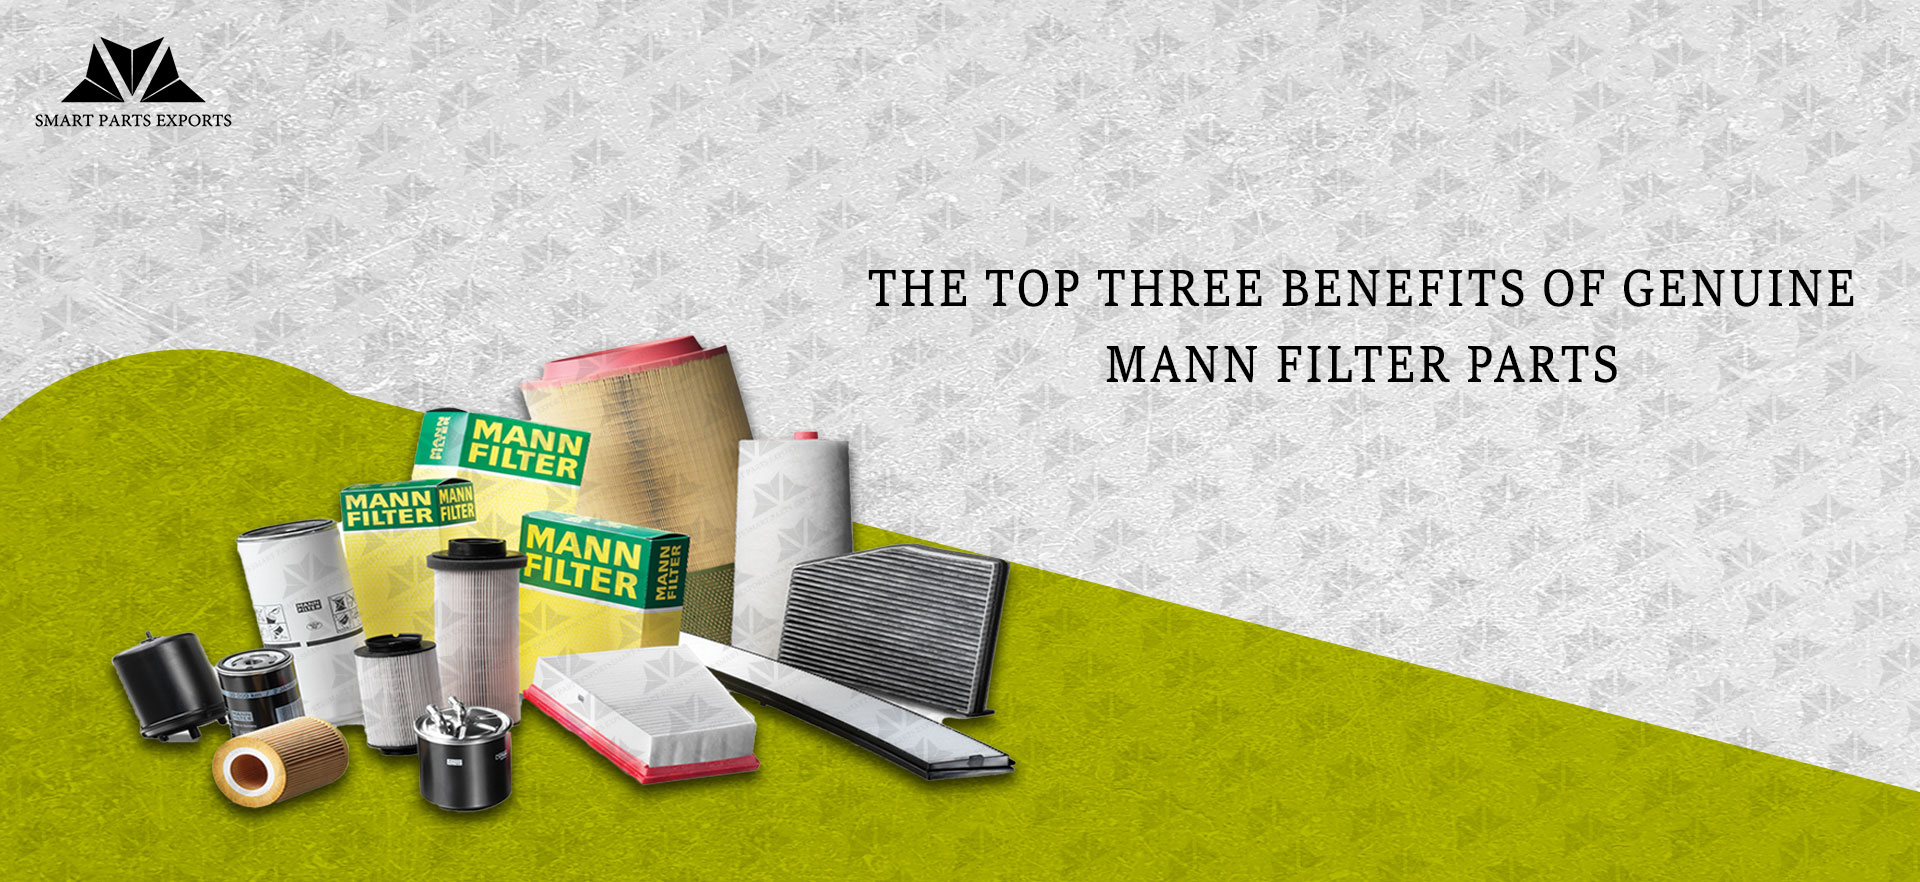 The Top Three Benefits of Genuine Mann Filter